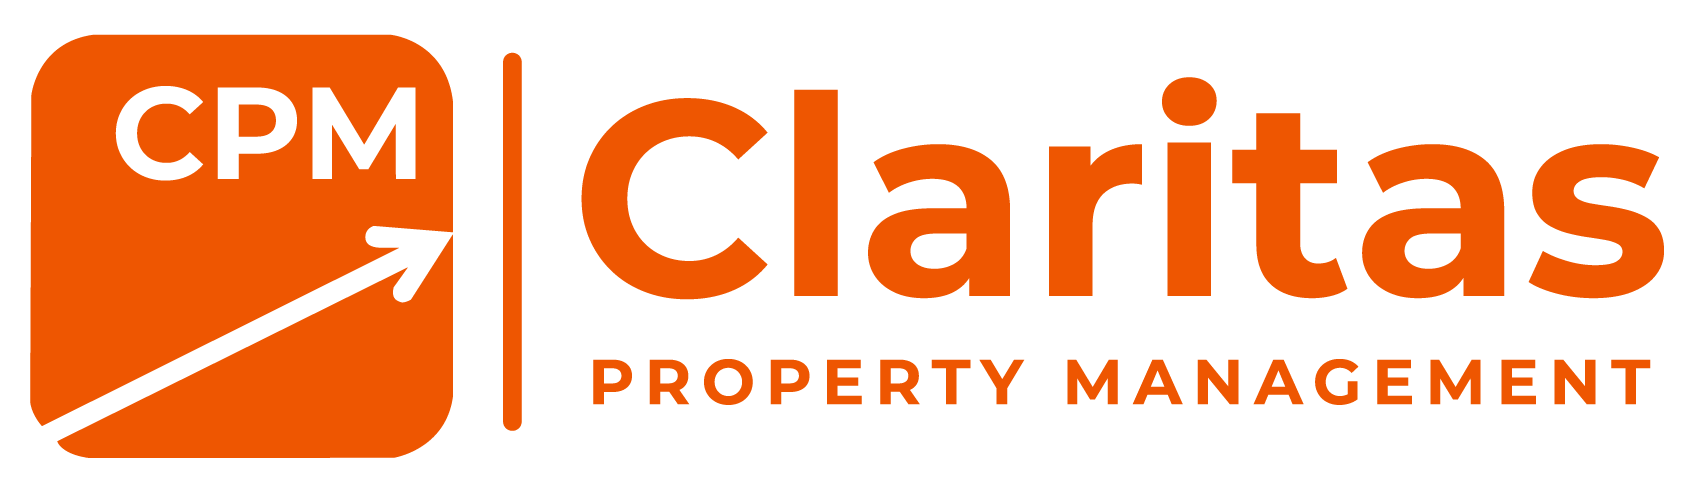 About Claritas Property Management, Western Chicago